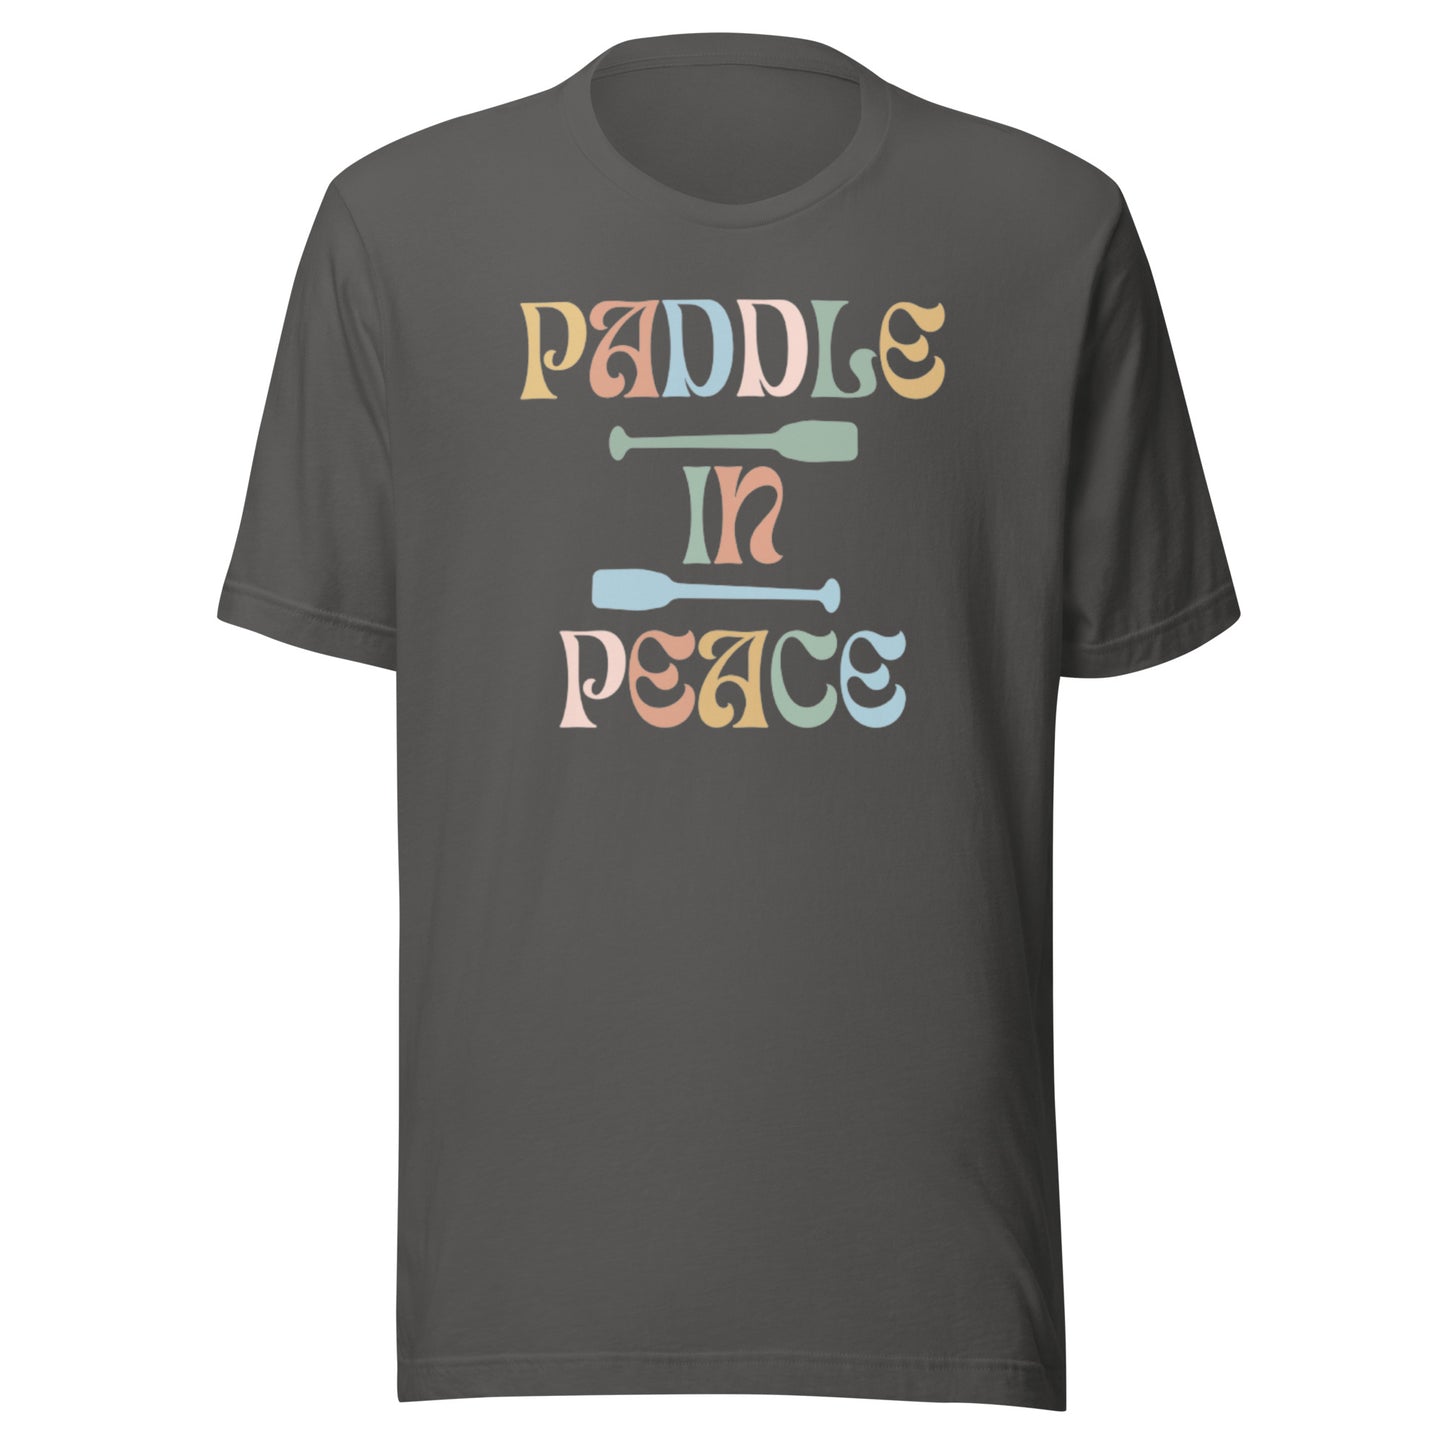 Paddle In Peace T-Shirt